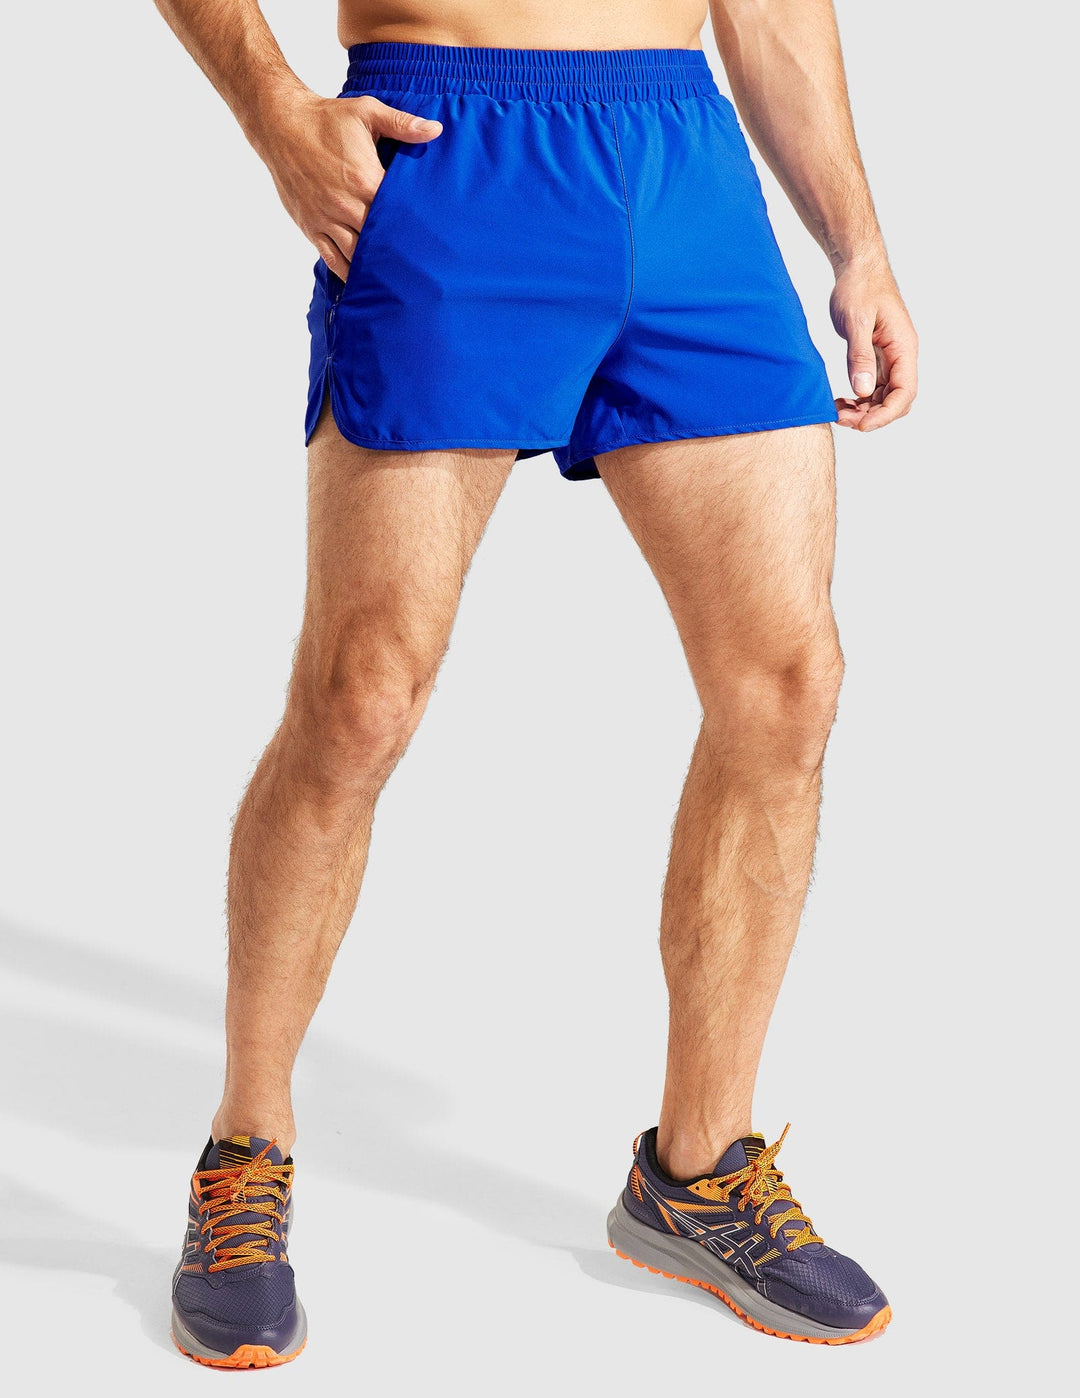 MIER Men's 3 Inches Quick Dry Running Shorts with Liner